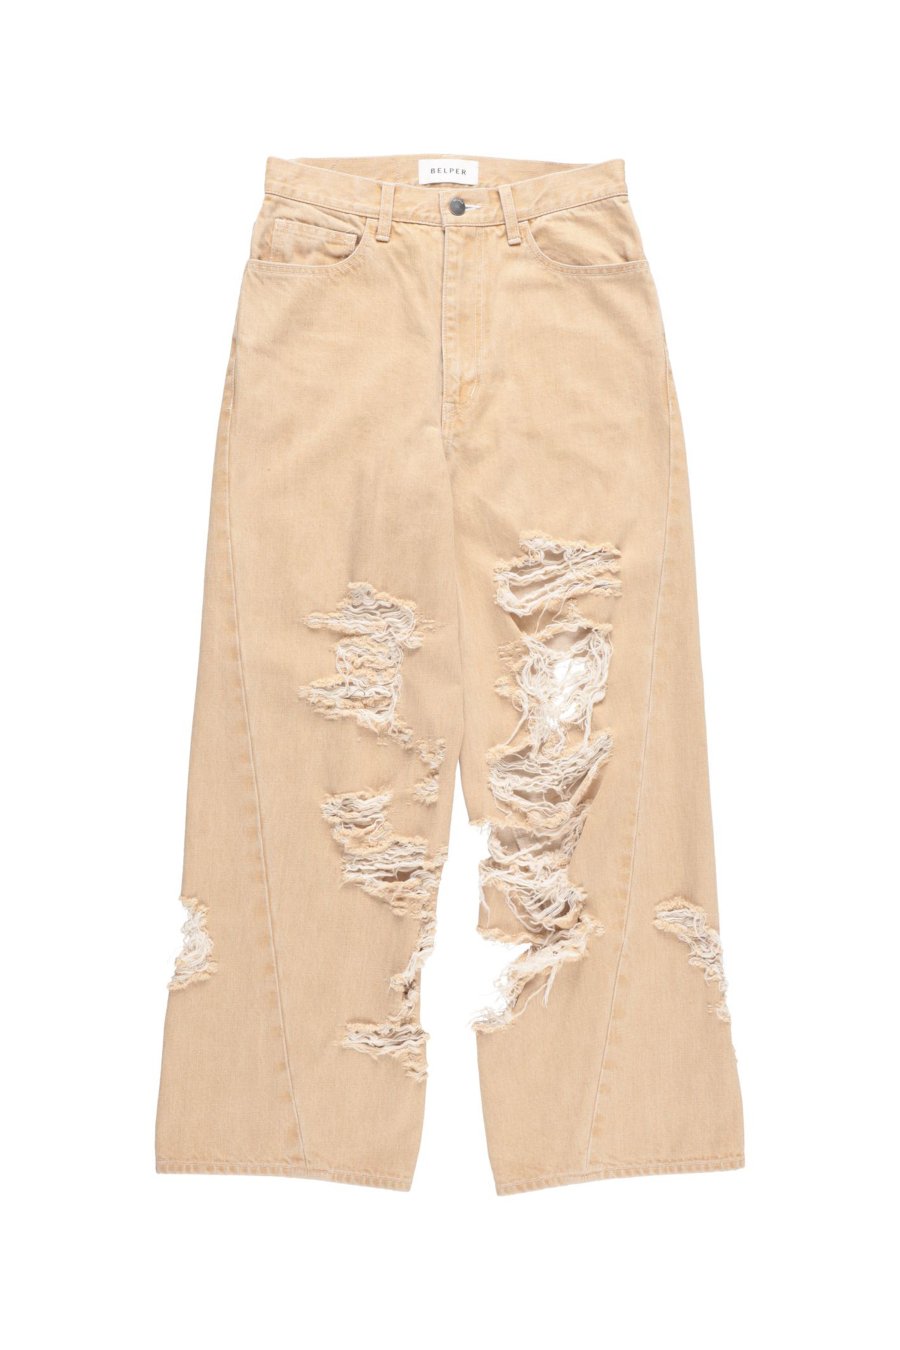 BELPER  TWISTED DENIM PANTS BEIGE<img class='new_mark_img2' src='https://img.shop-pro.jp/img/new/icons15.gif' style='border:none;display:inline;margin:0px;padding:0px;width:auto;' />